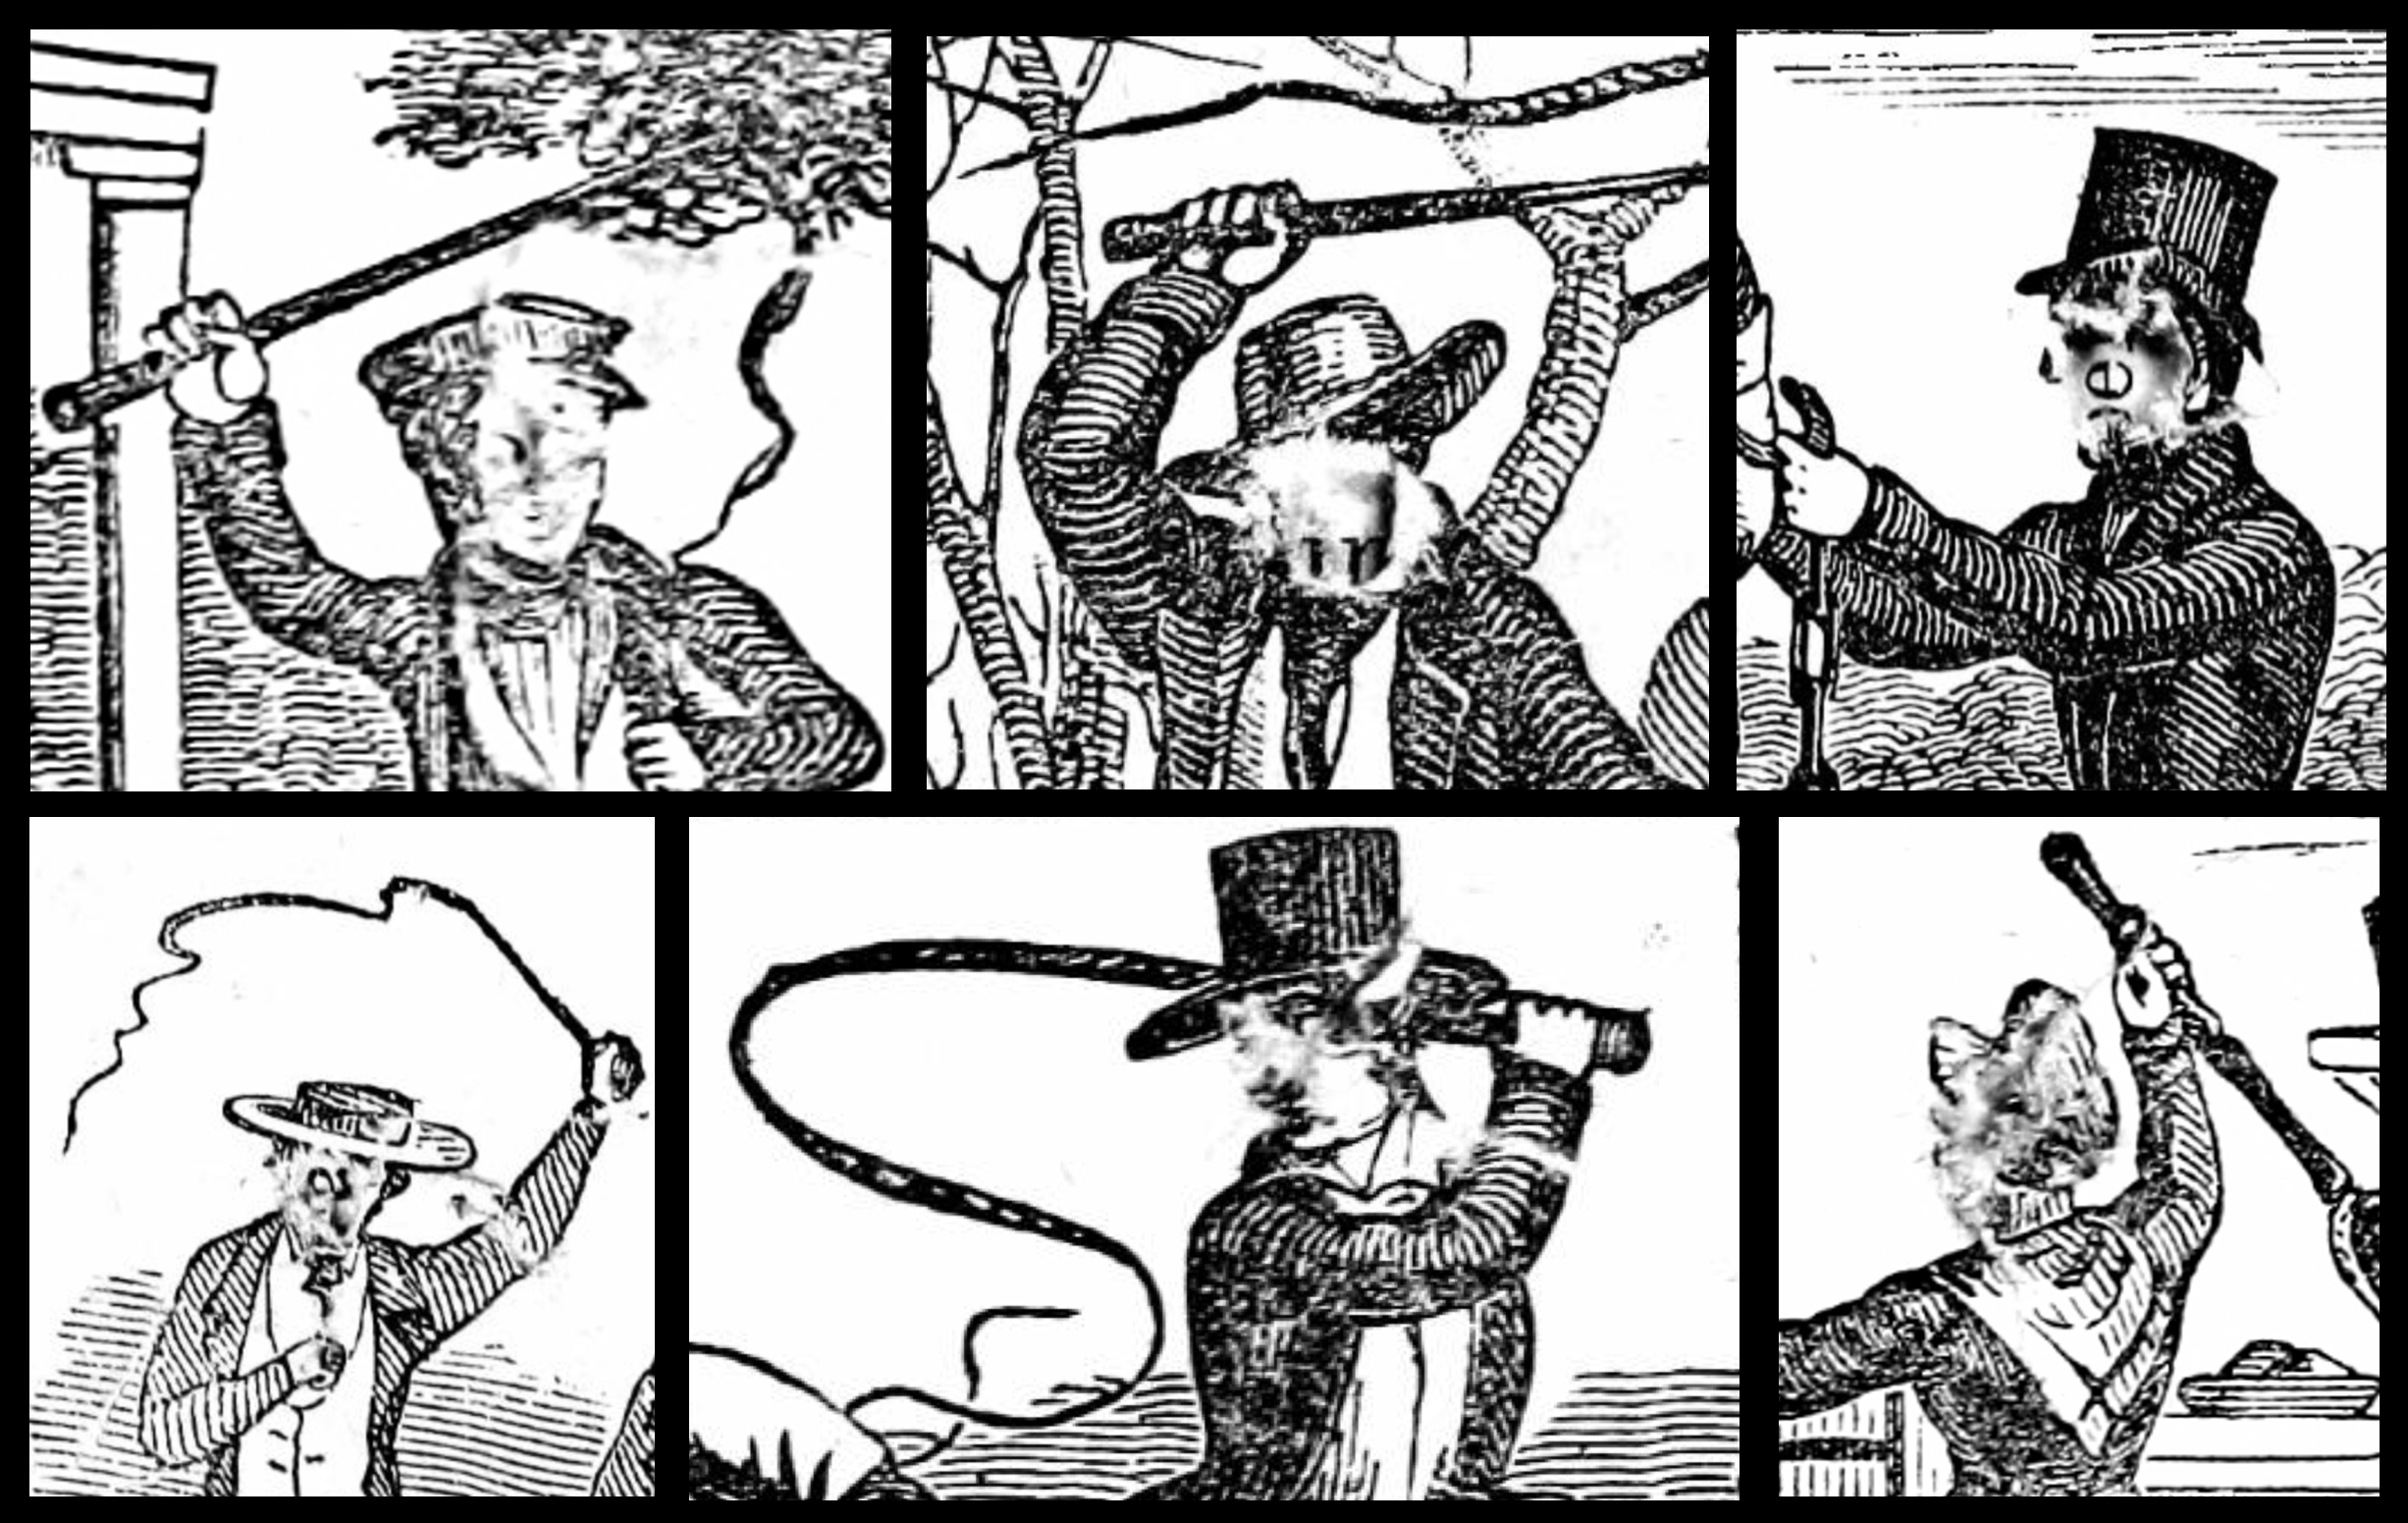 Details of black-and-white illustrations of white people with weapons, arranged in grid format. All the faces have been scratched out.